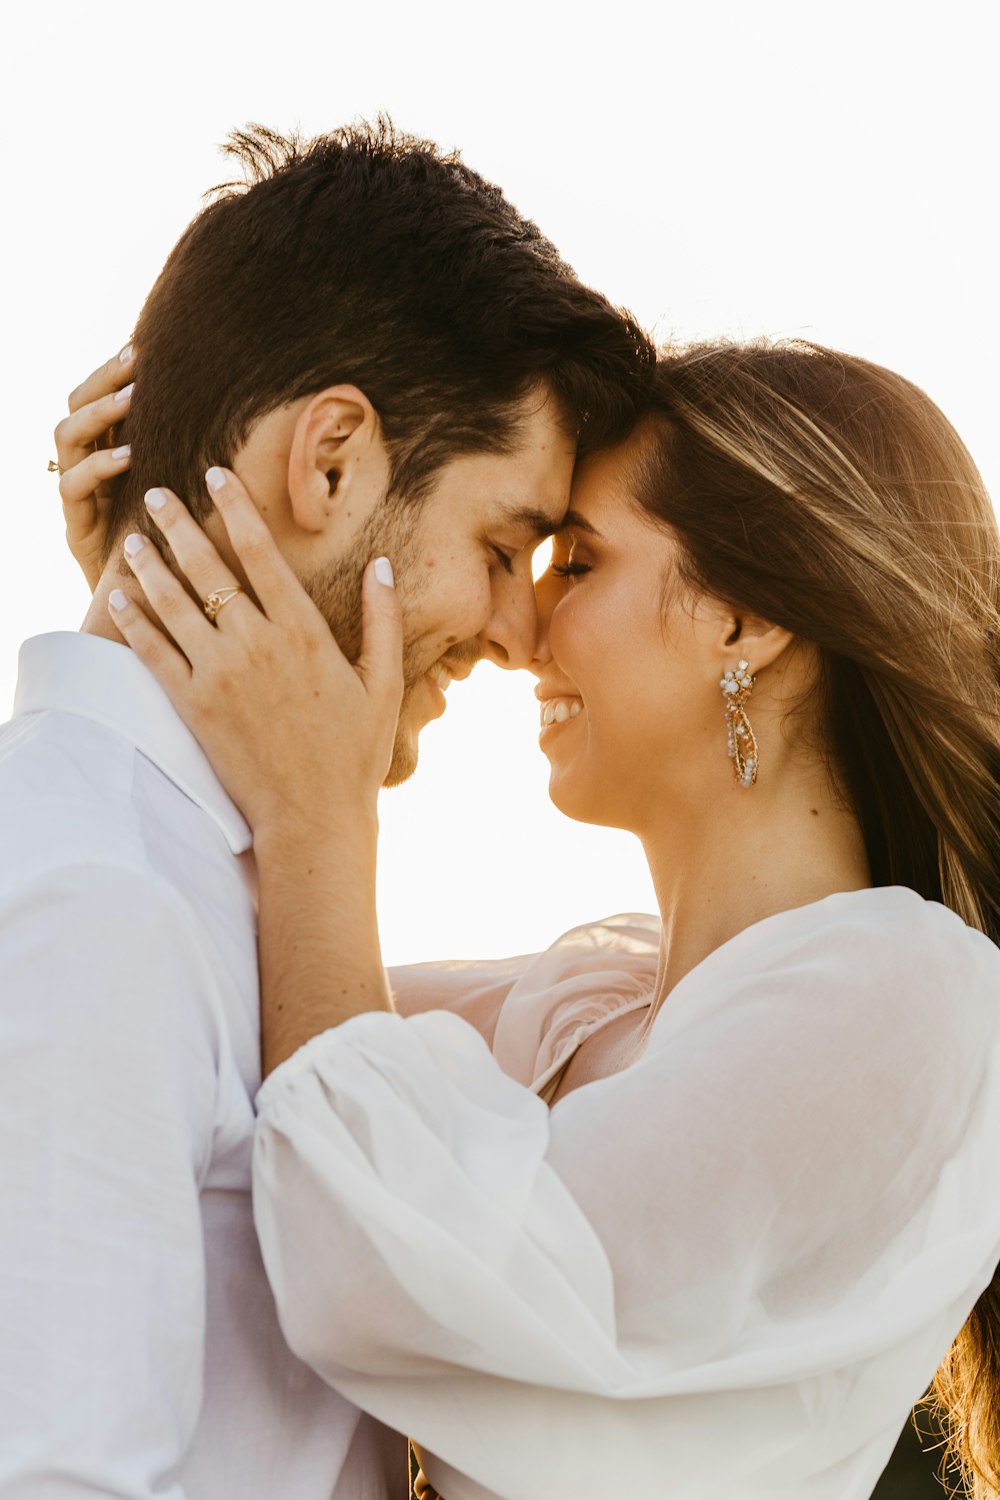 man and woman kissing each other during daytime